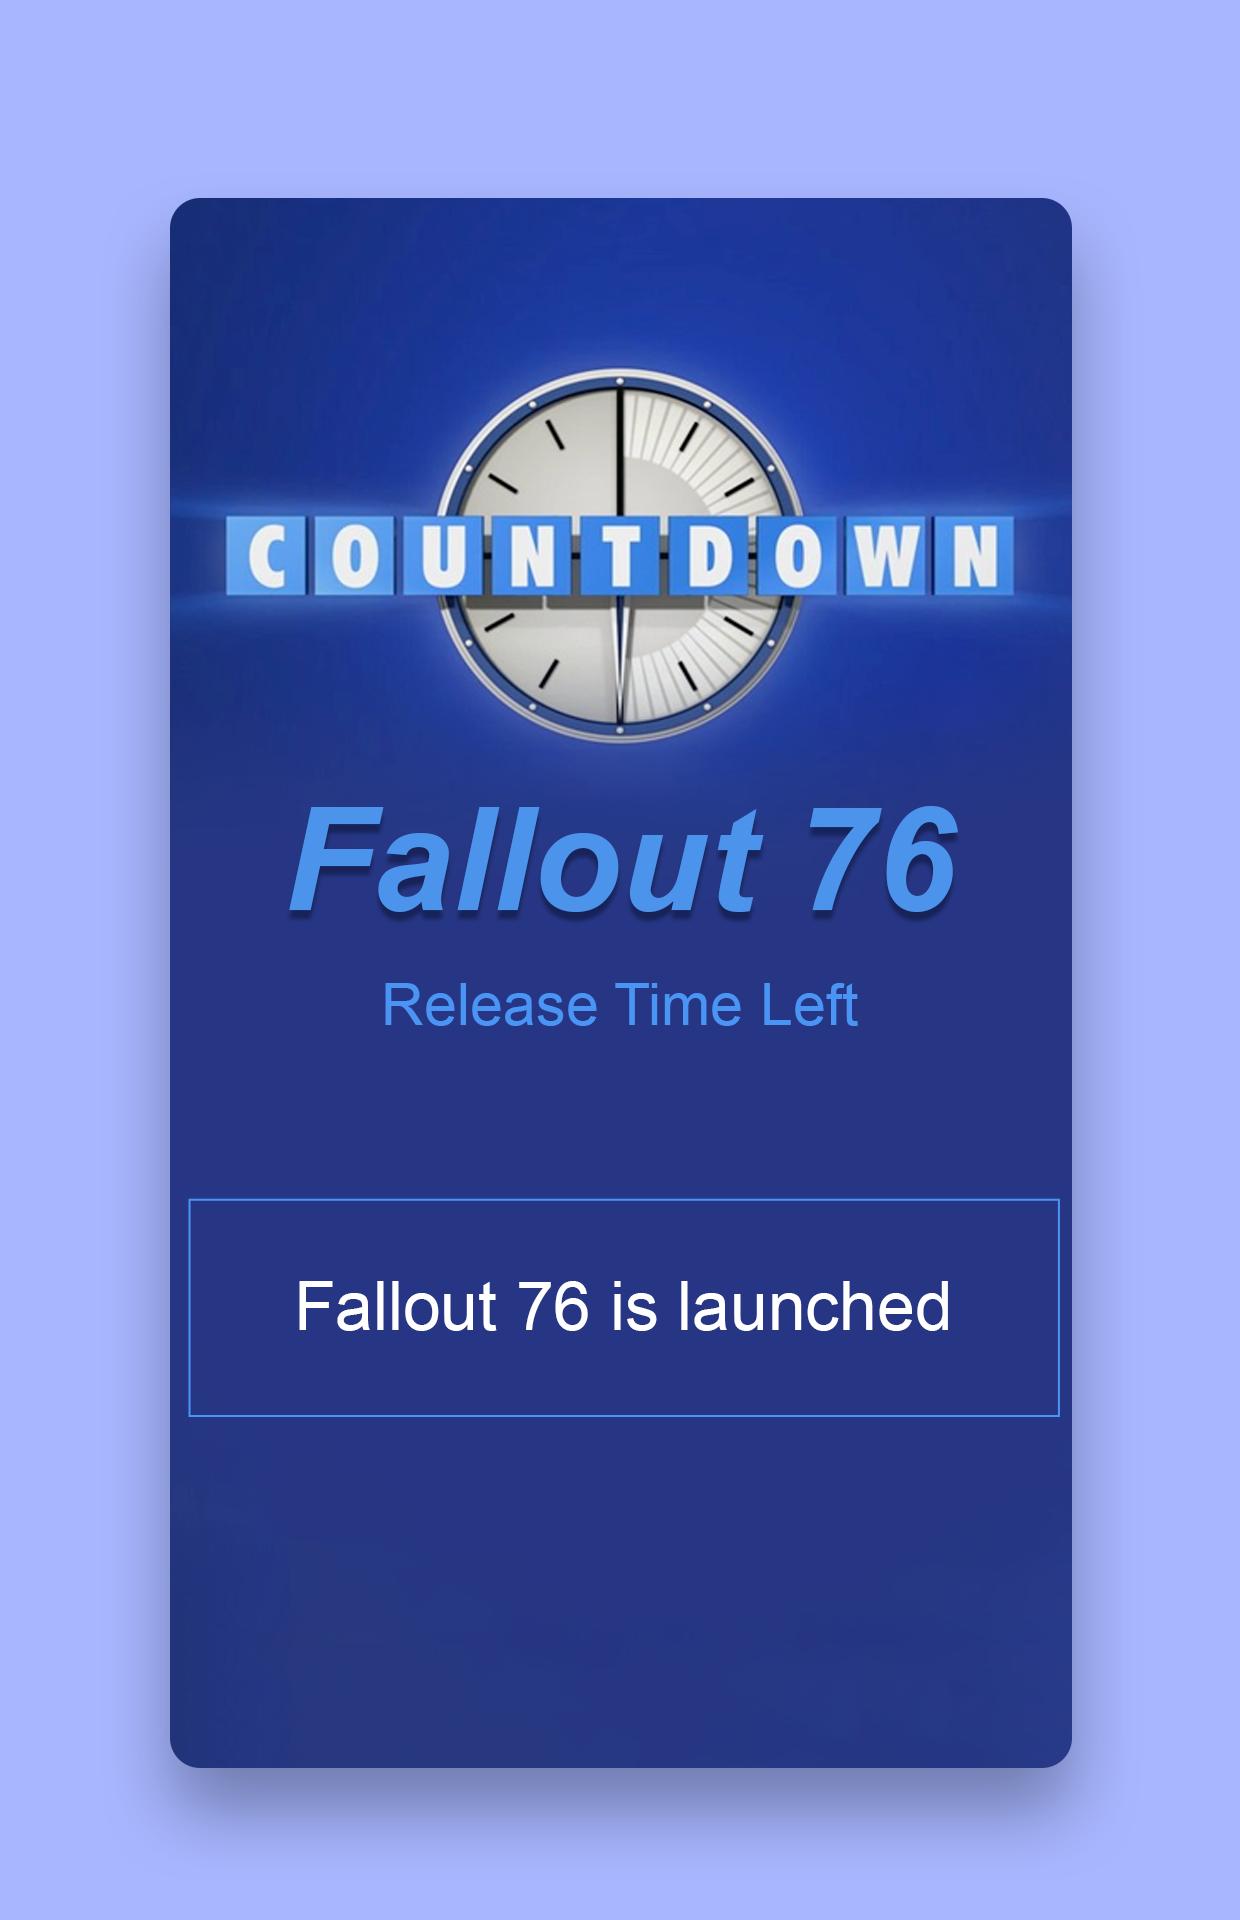 Android 用の Countdown For Fallout 76 Fallout 76 Wallpaper Apk をダウンロード